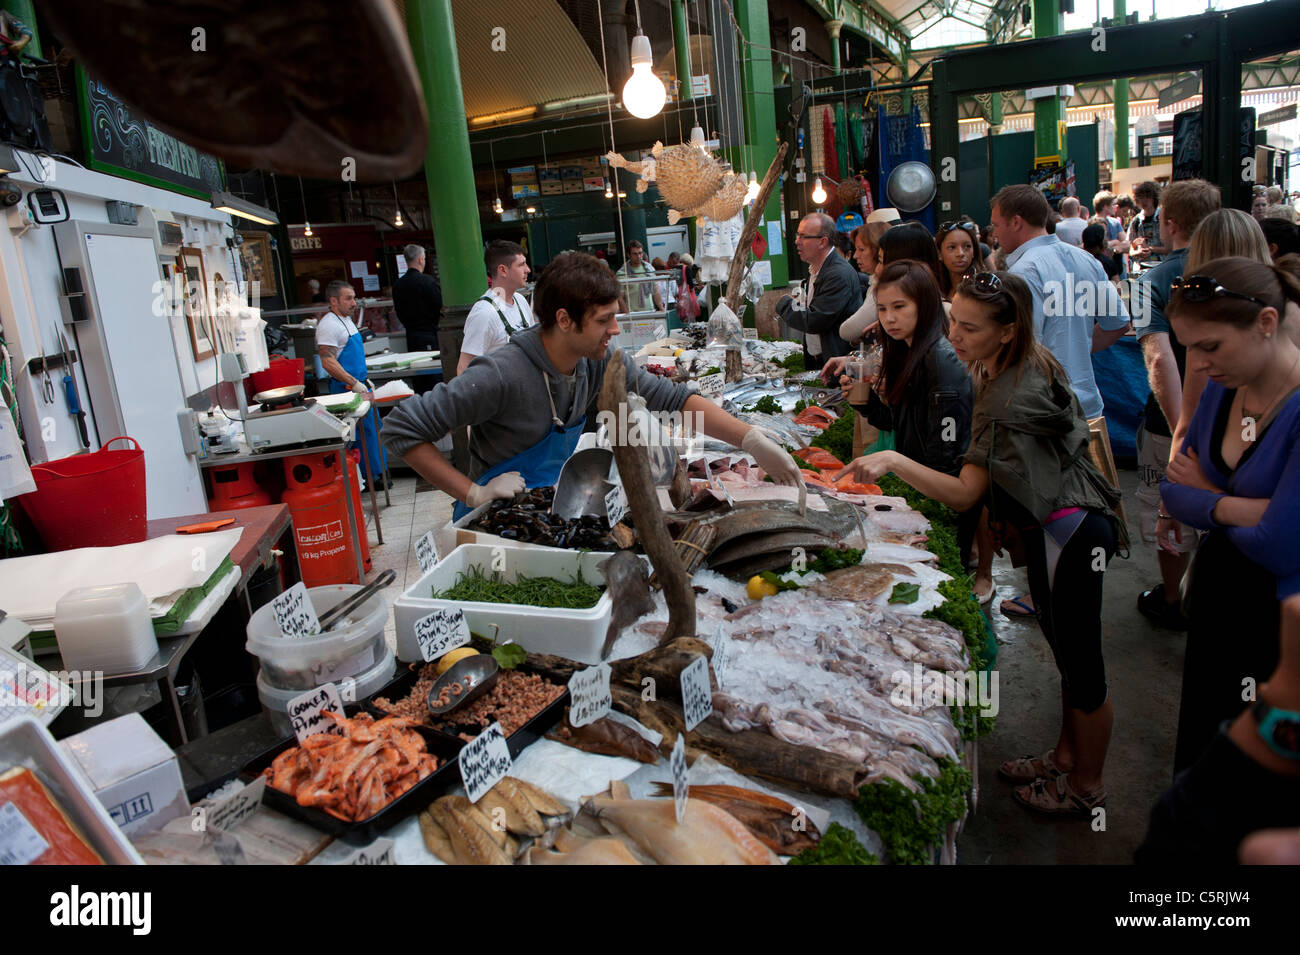 Borough Market in south London, England. Food luvies heaven. Stock Photo